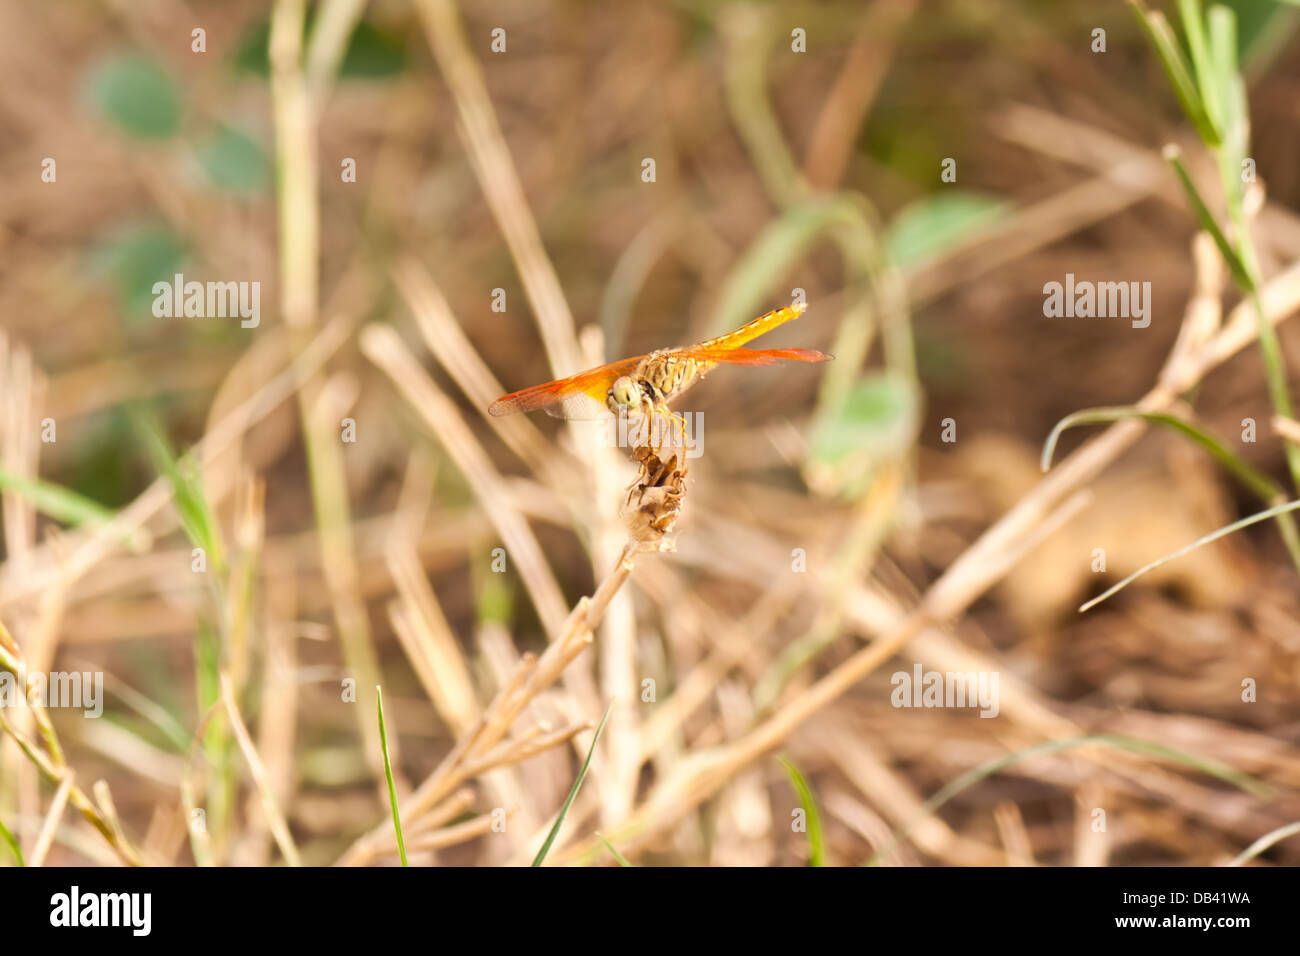 Dragonfly in nature Stock Photo